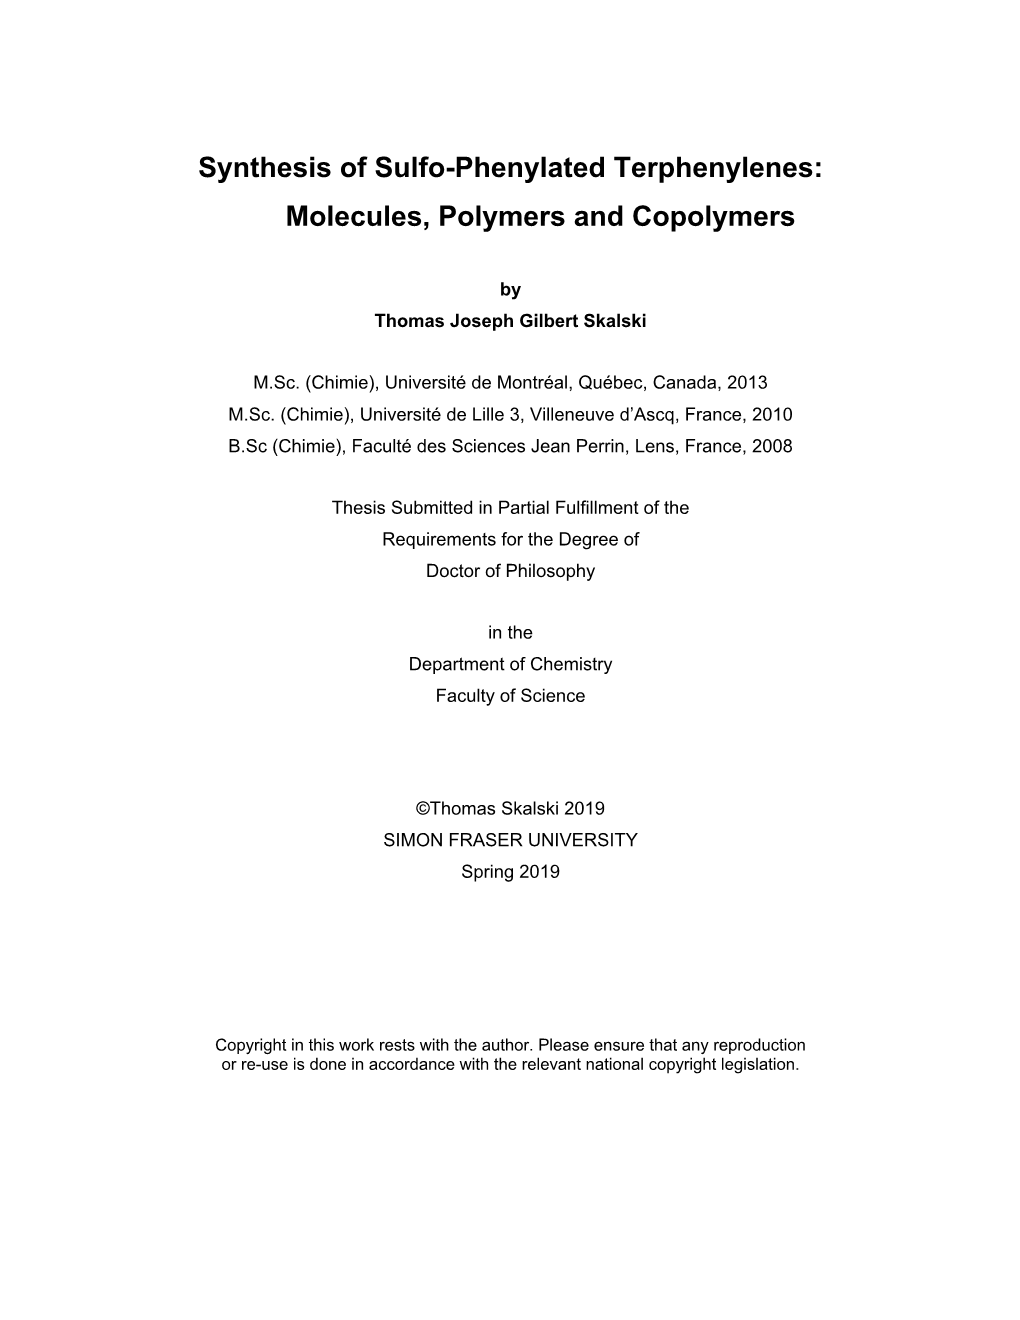 Synthesis of Sulfo-Phenylated Terphenylenes: Molecules, Polymers and Copolymers